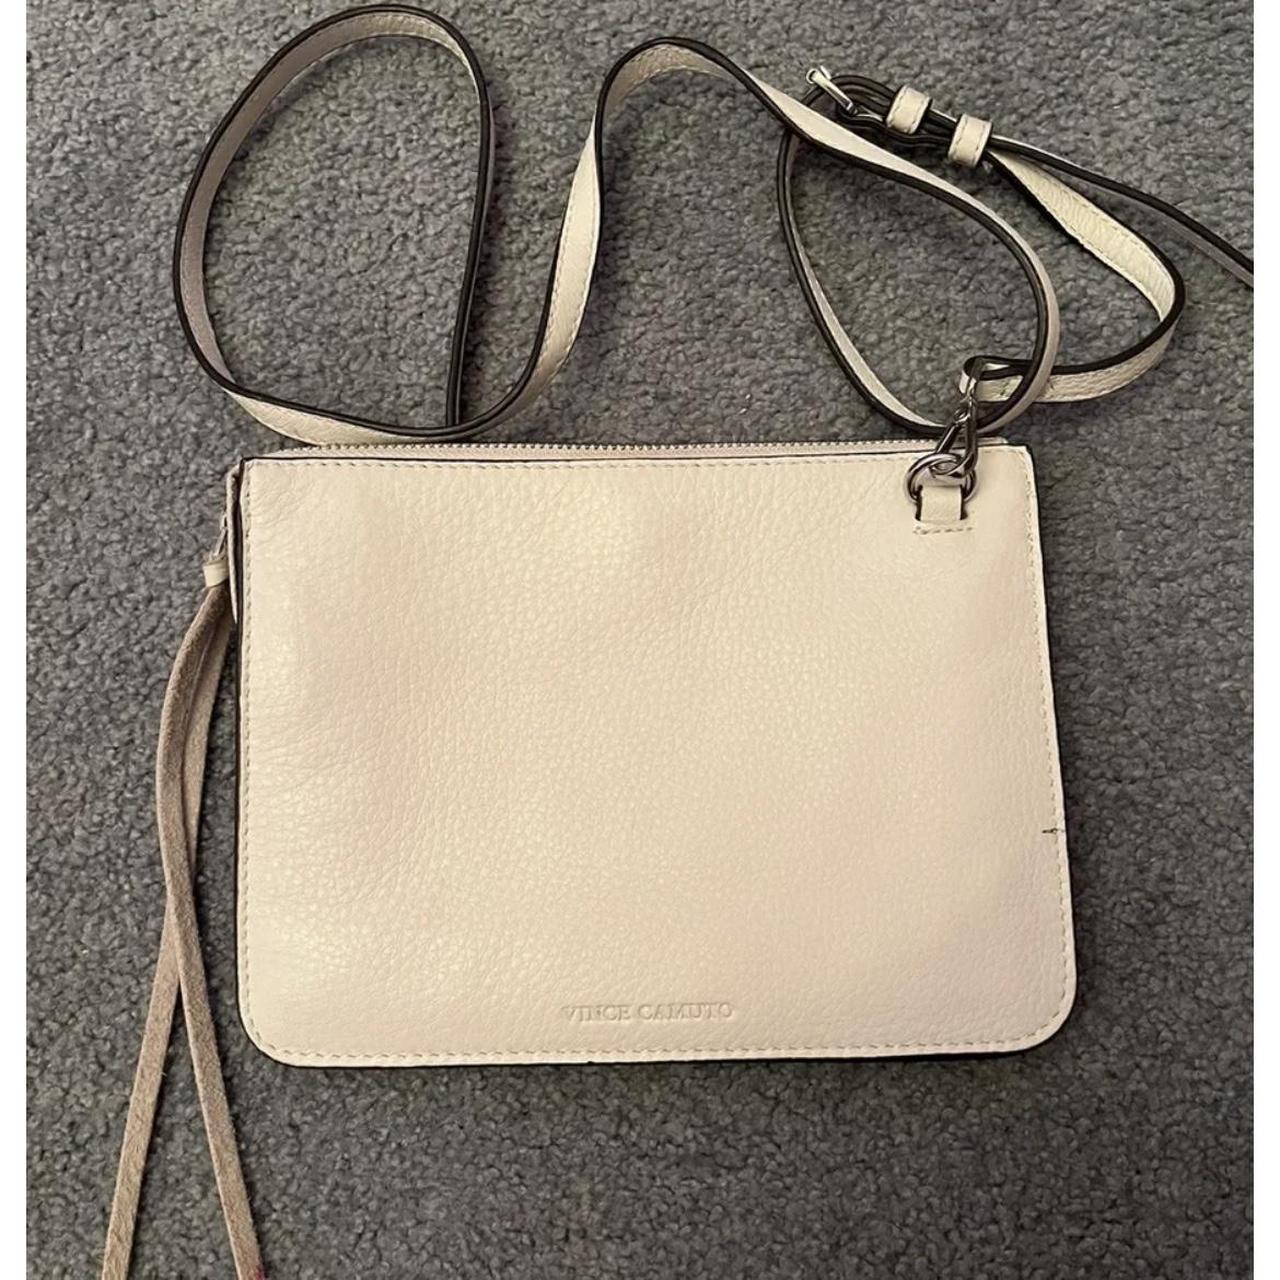 Bags from Vince Camuto for Women in White